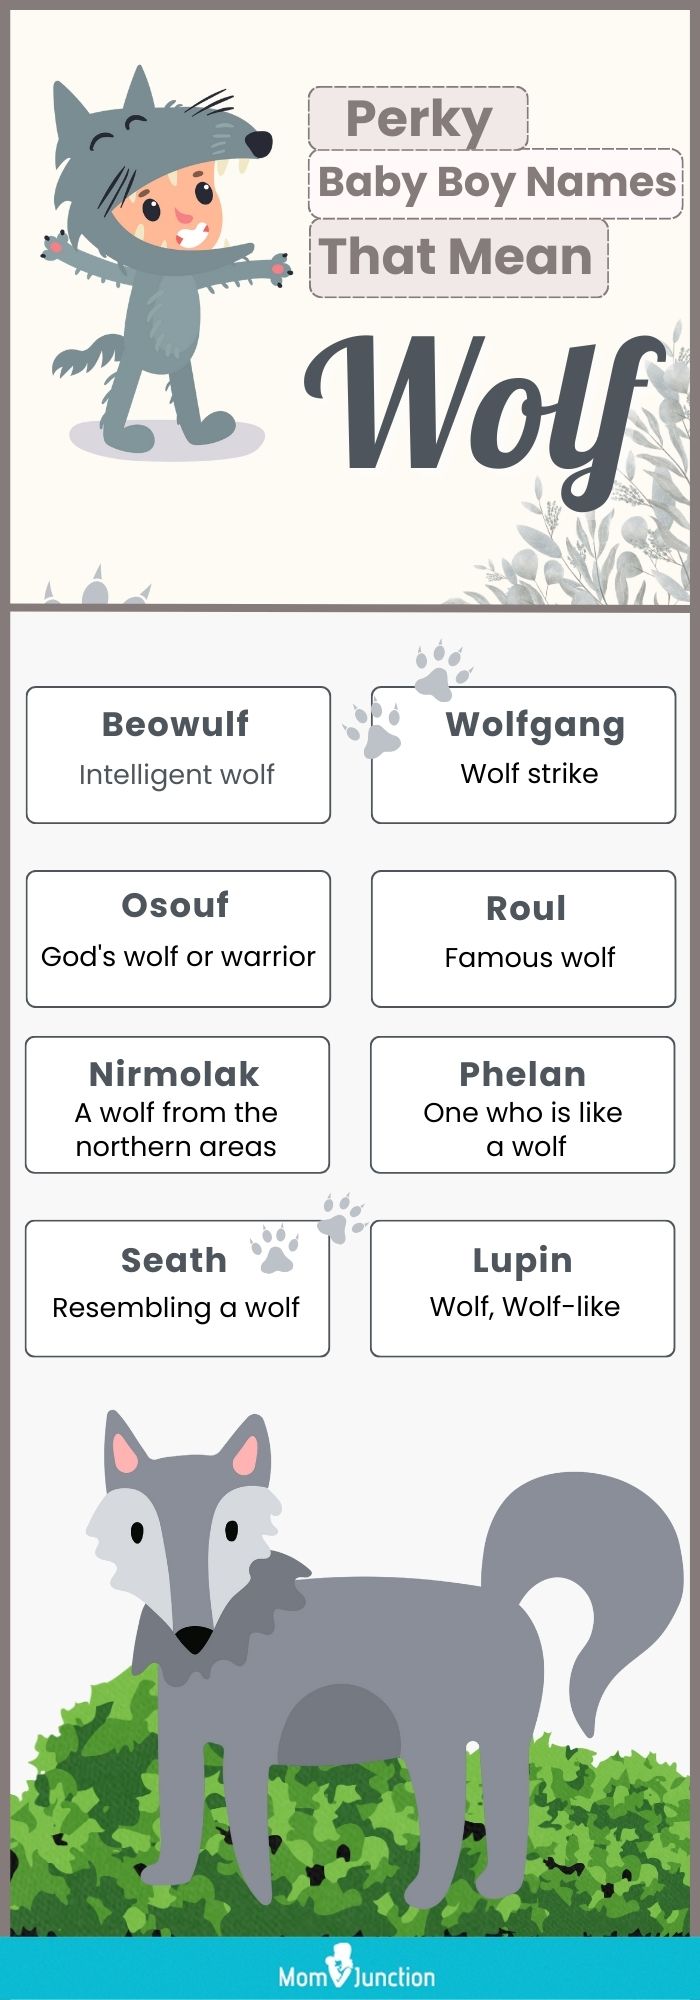 perky baby boy names that wolf (infographic)